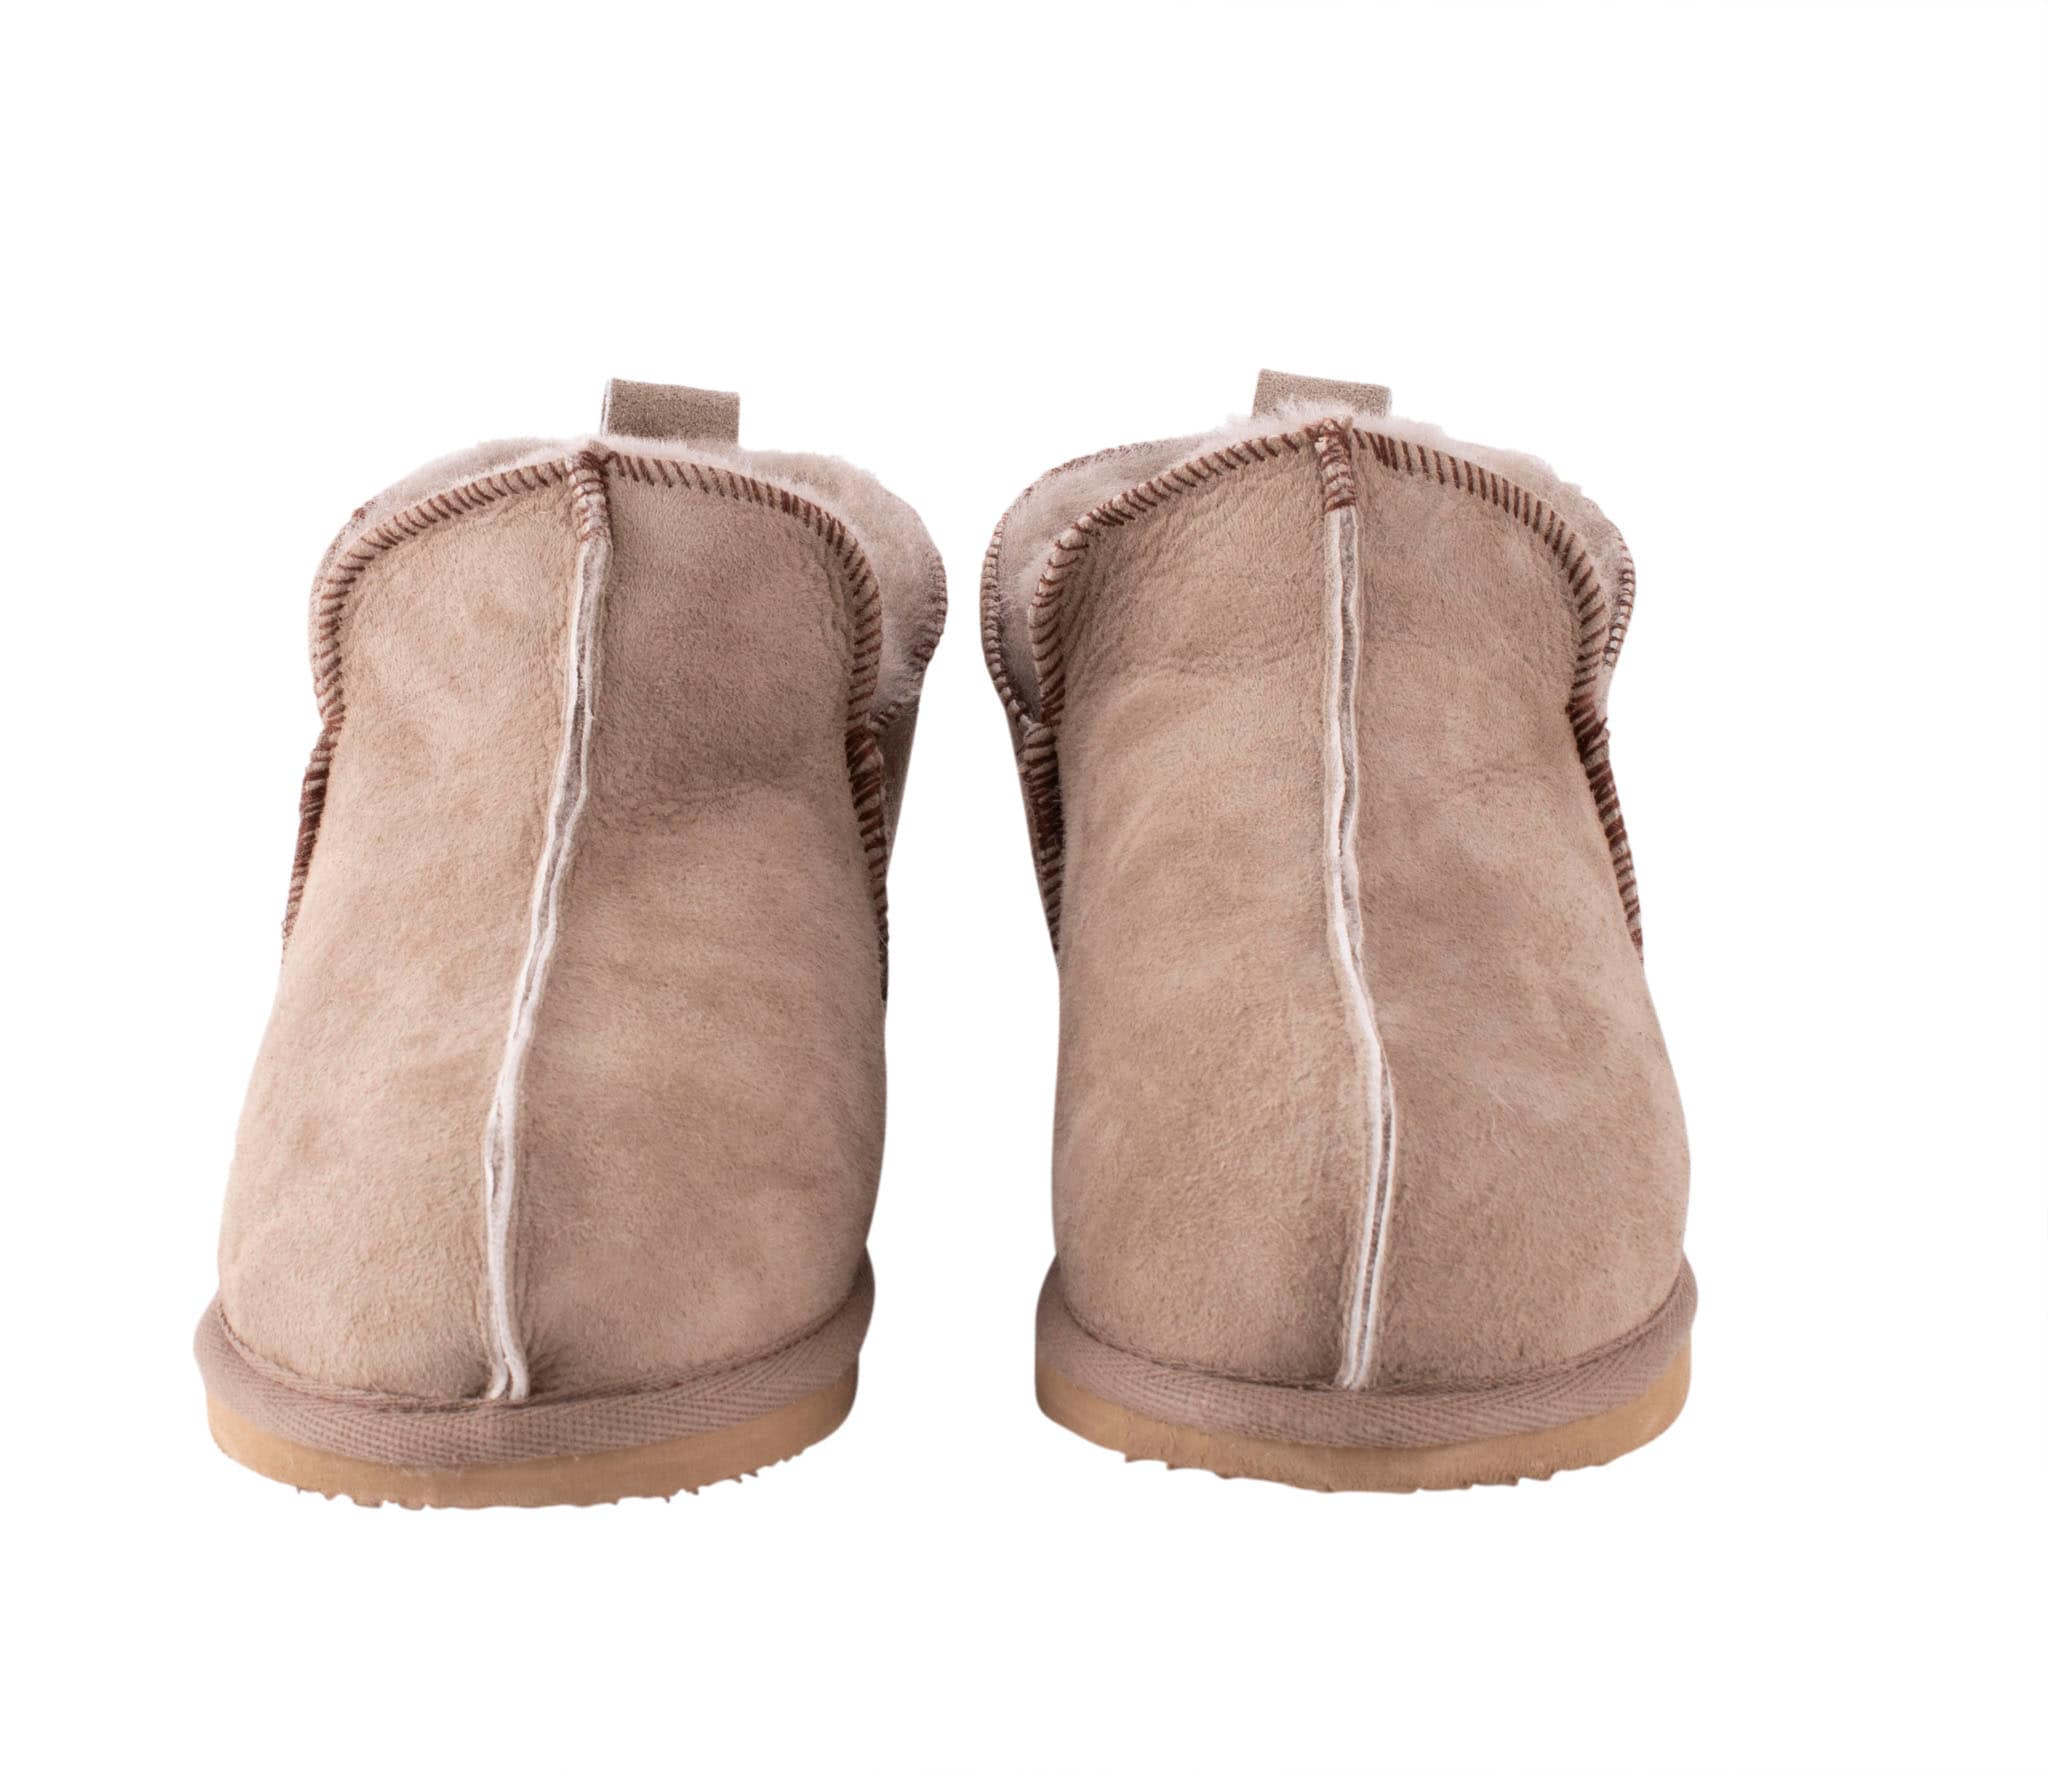 Buy Shepherd of Sweden Annie Classic Cognac Sheepskin Slippers Online |  Kogan.com. These Sheepskin slippers are a classic Boot style in Antique  Cognac. They are made using ethical traditional craftsmanship and modern